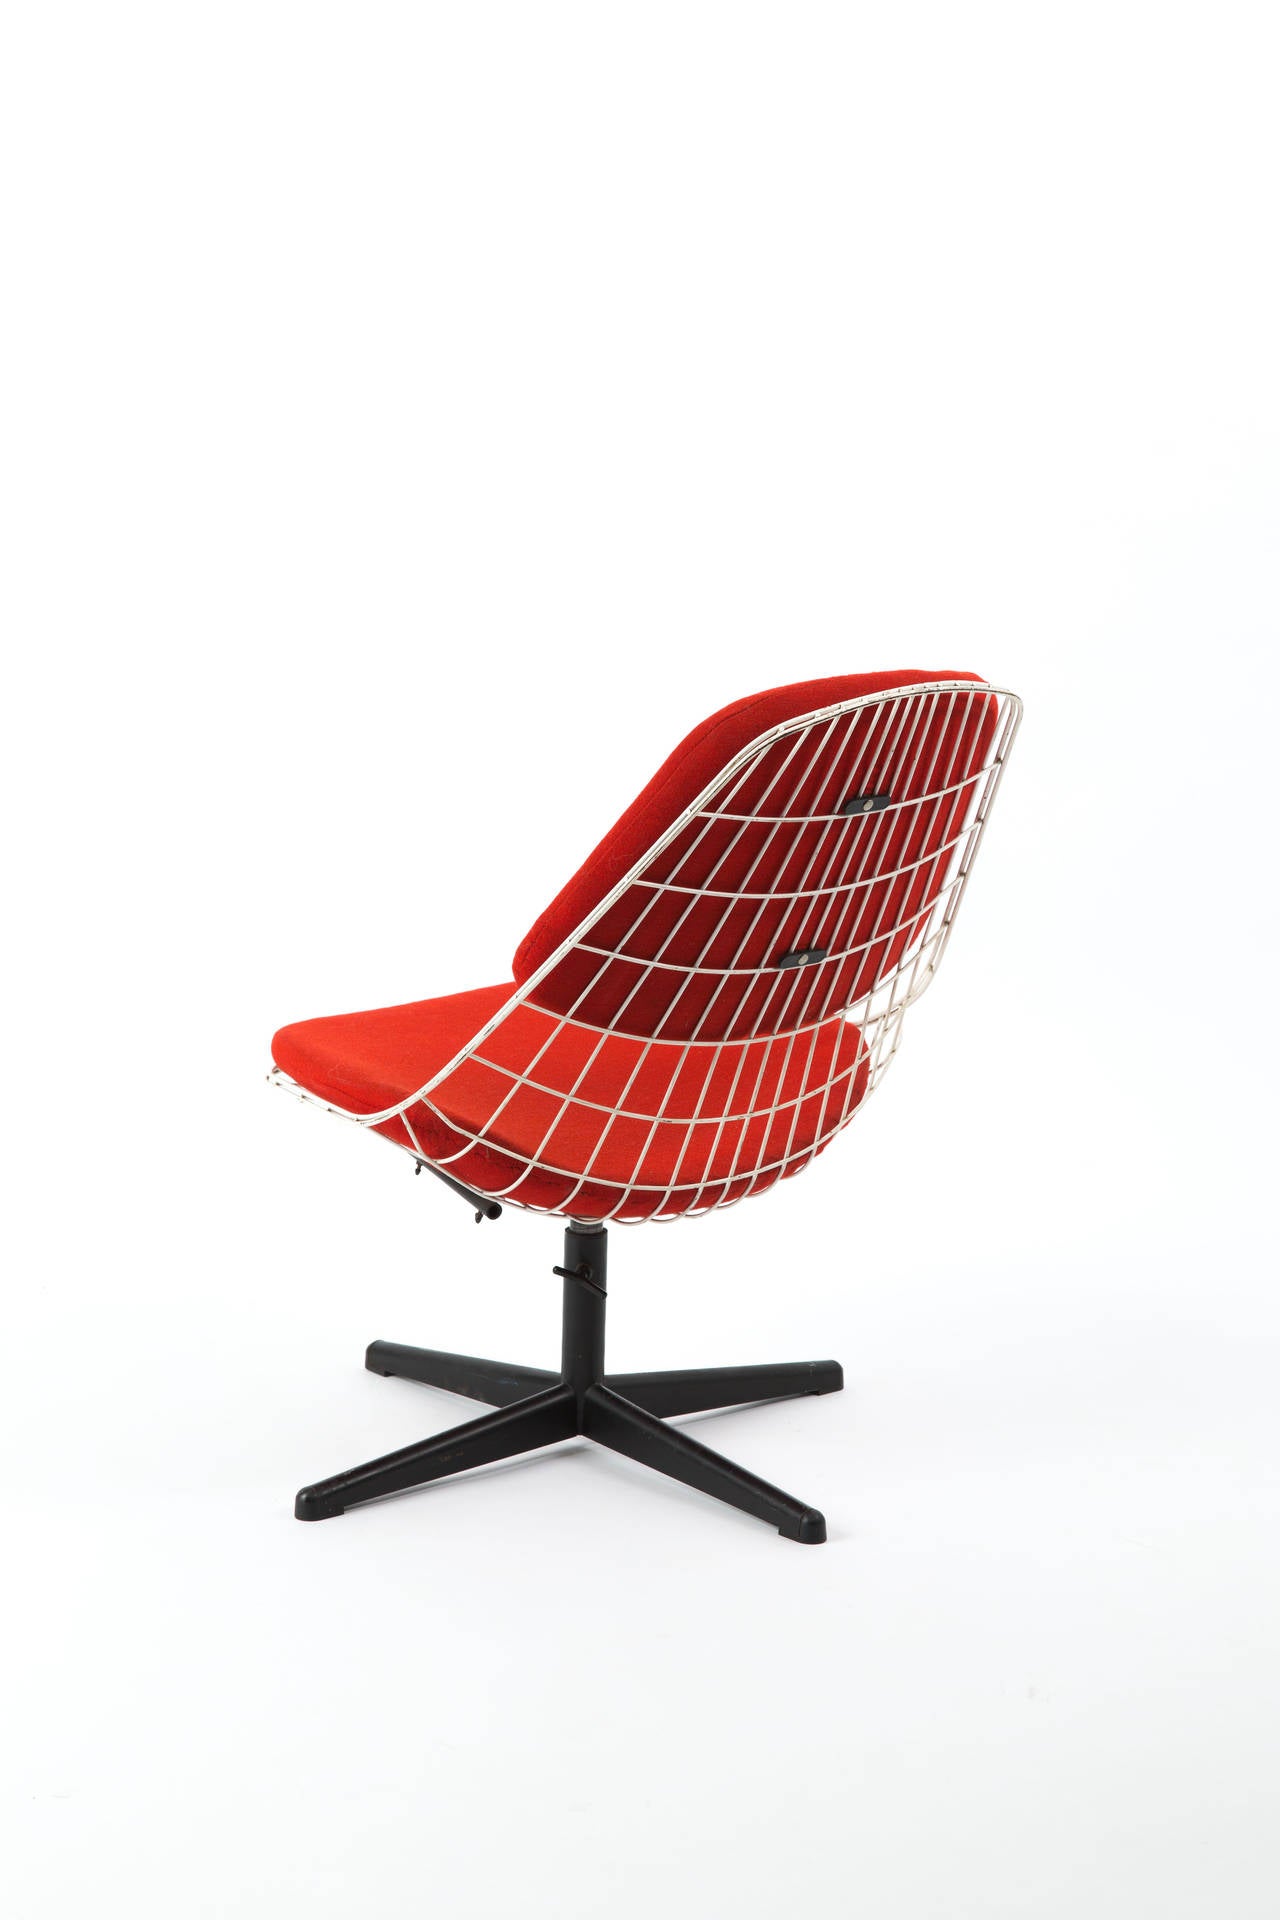 Cees Braakman for Pastoe Swivel Chair For Sale 3